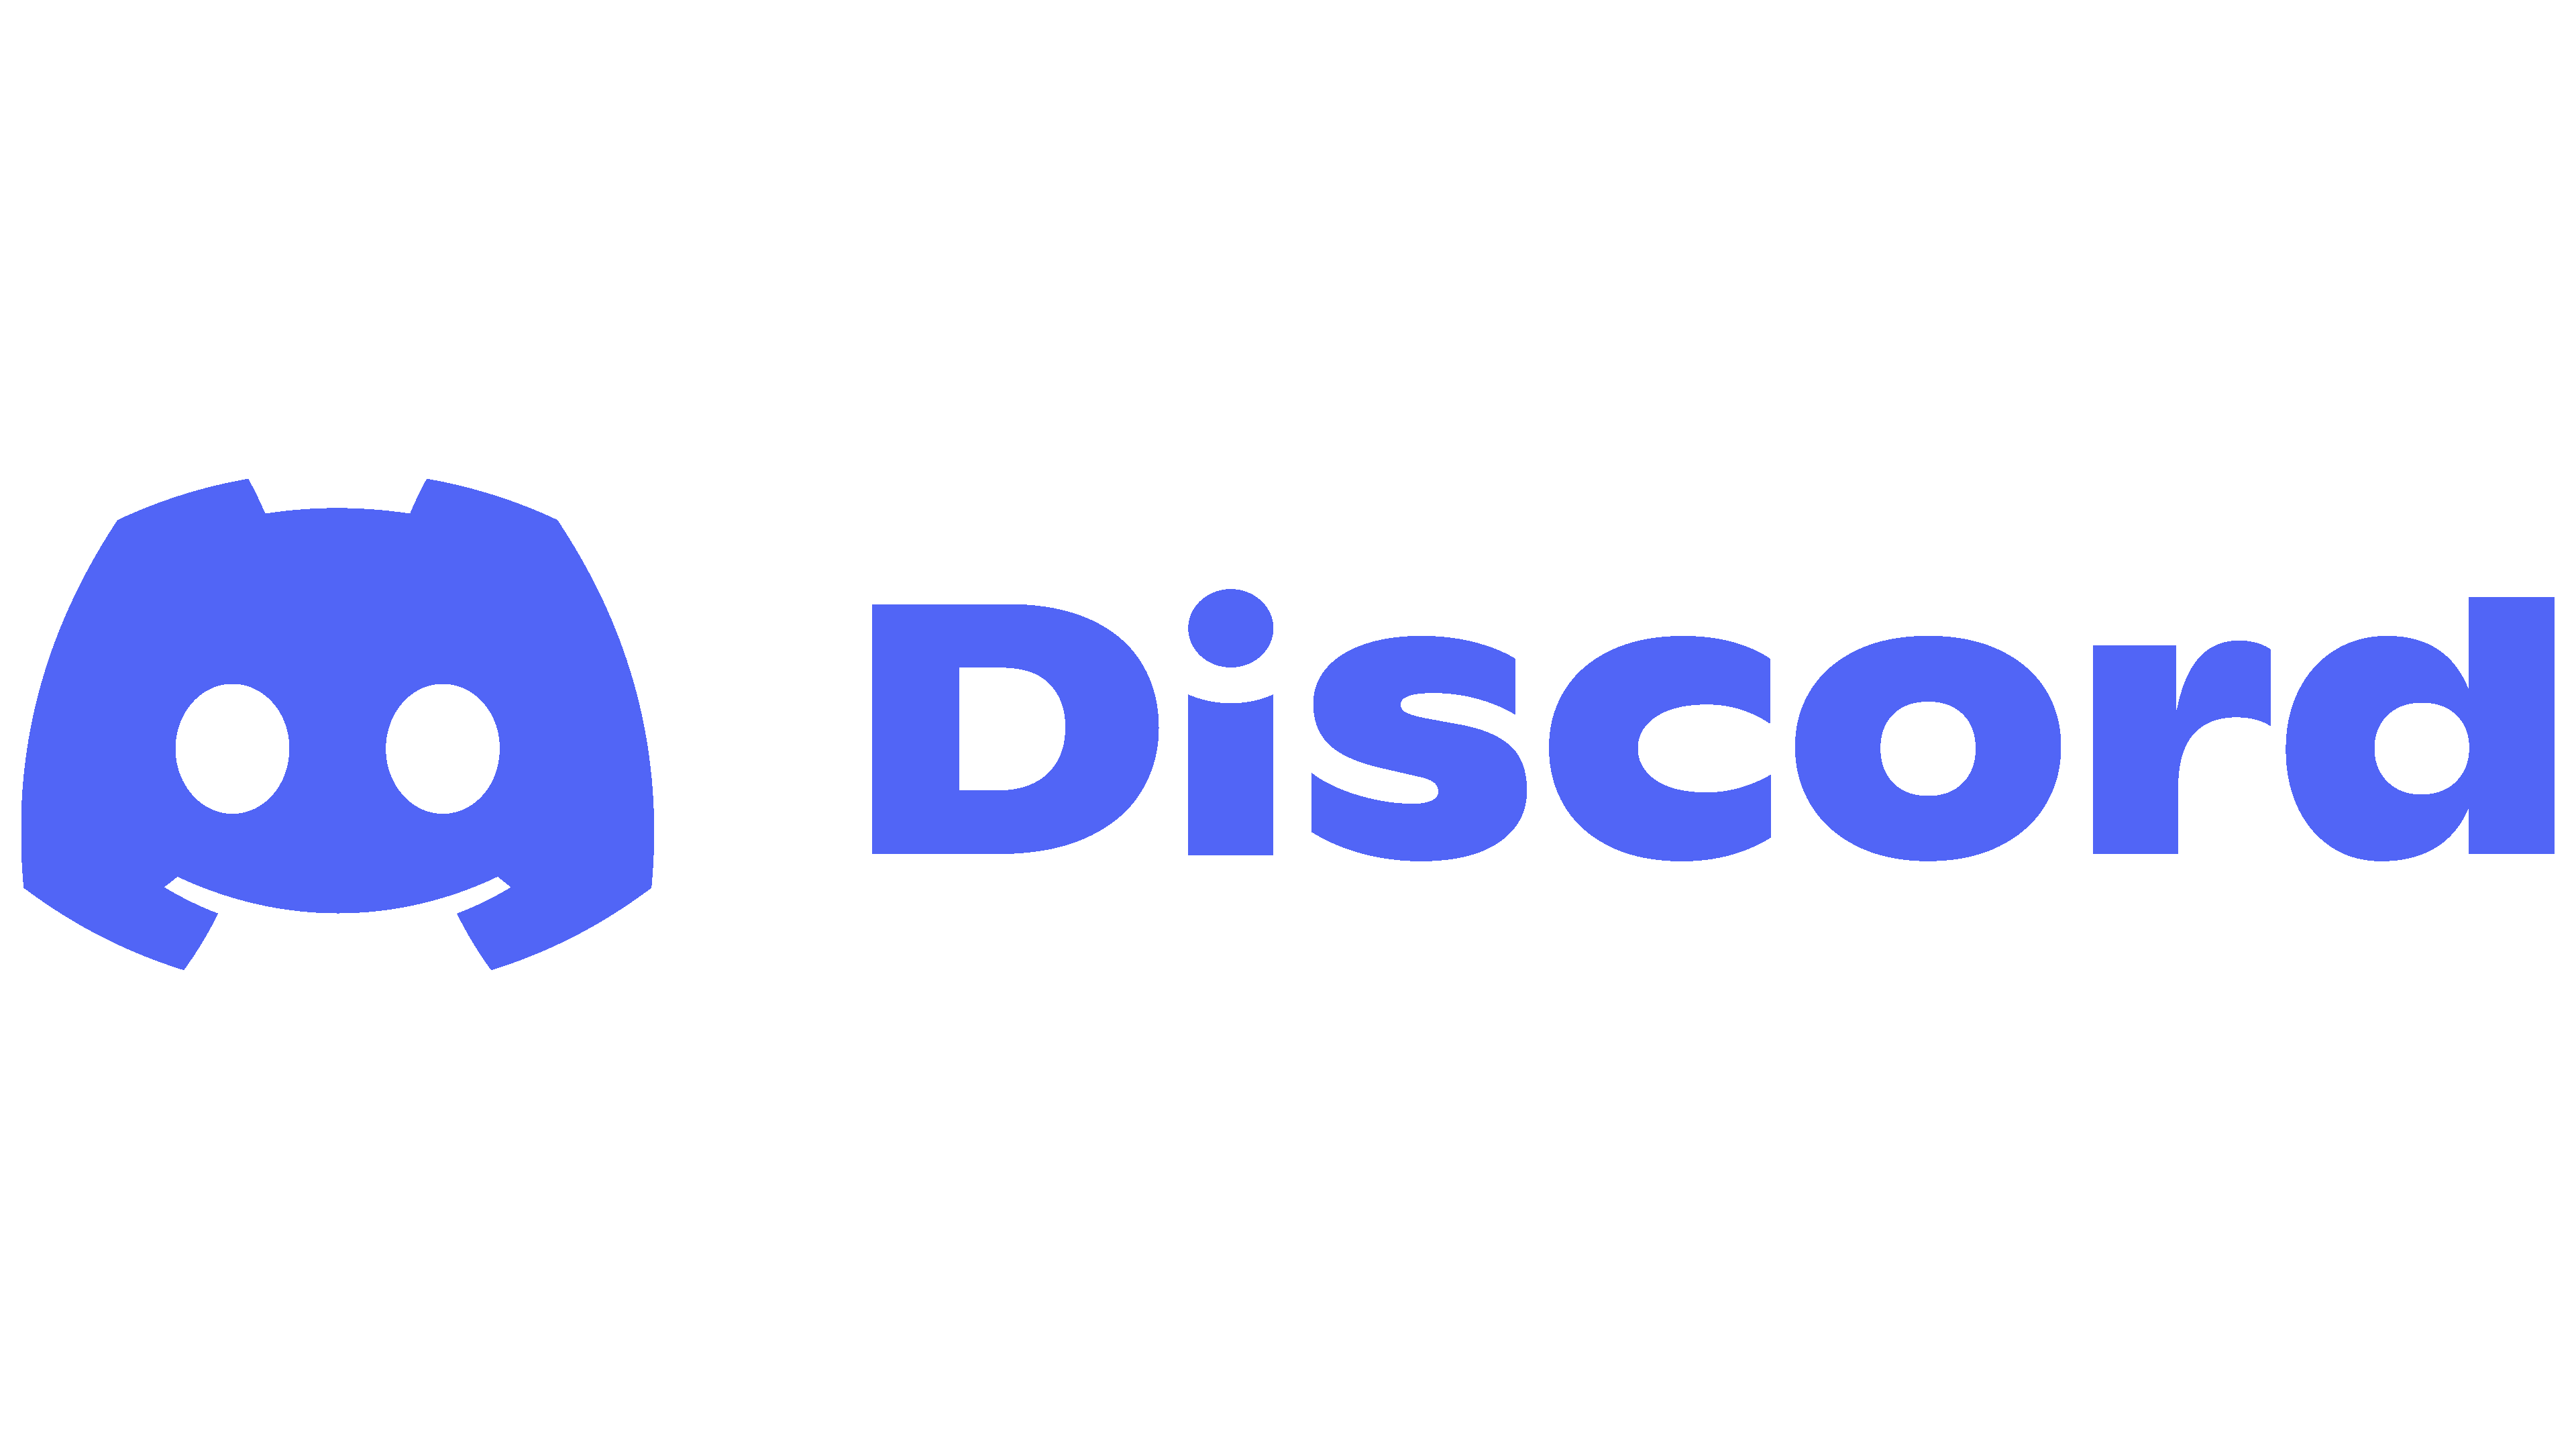 Discord is a chat service designed for gamers.